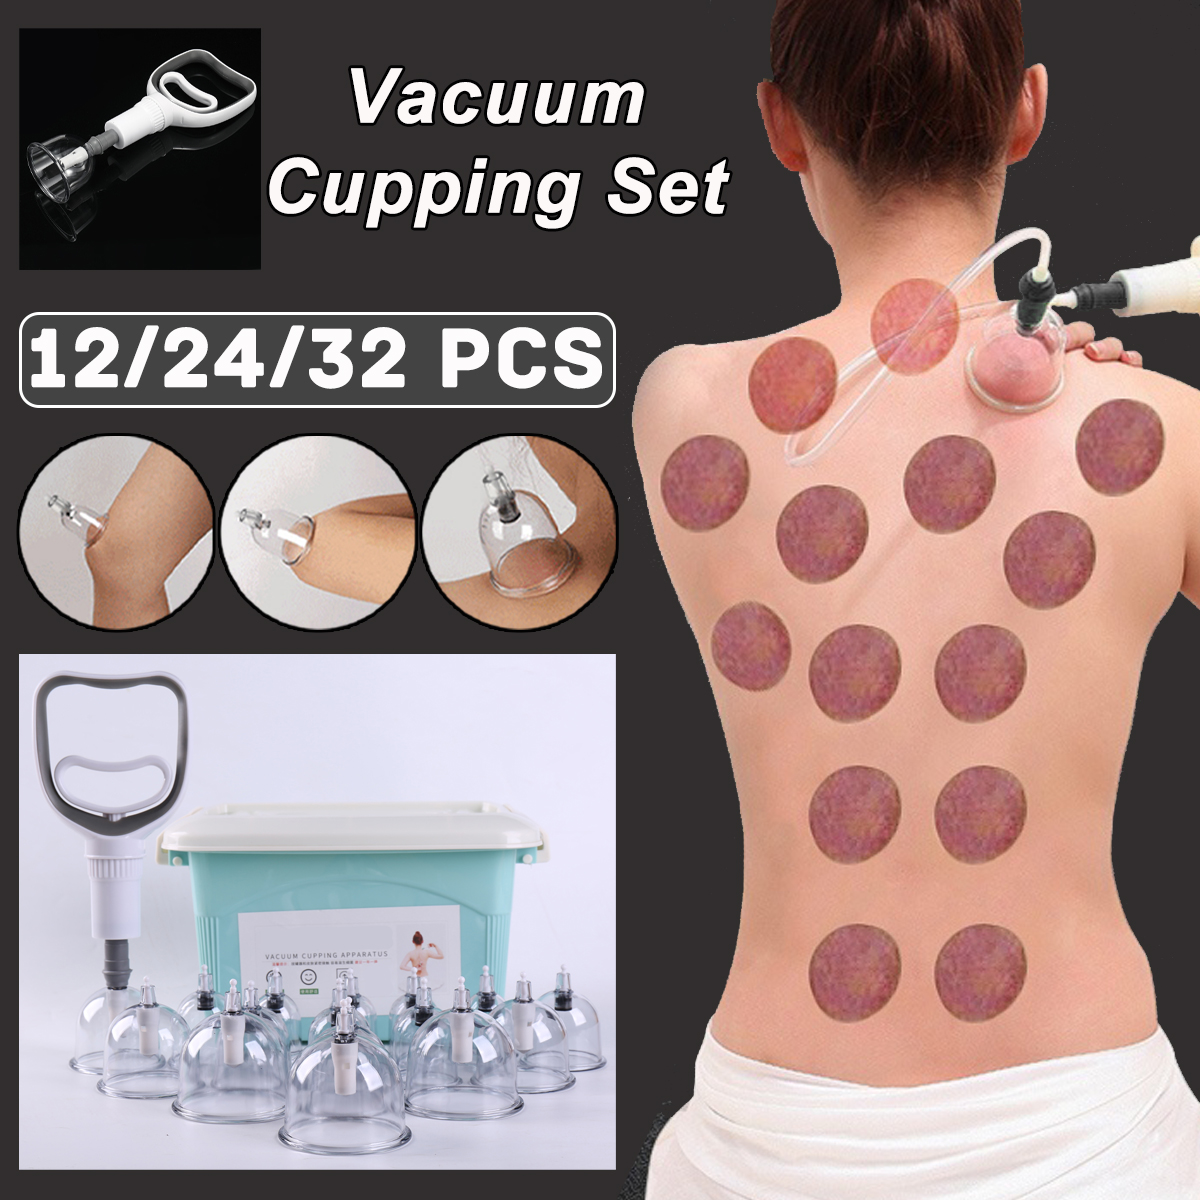 122432pcs-Medical-Chinese-Vacuum-Cupping-Body-Massage-Therapy-Healthy-Suction-Cupping-Massager-1893418-2